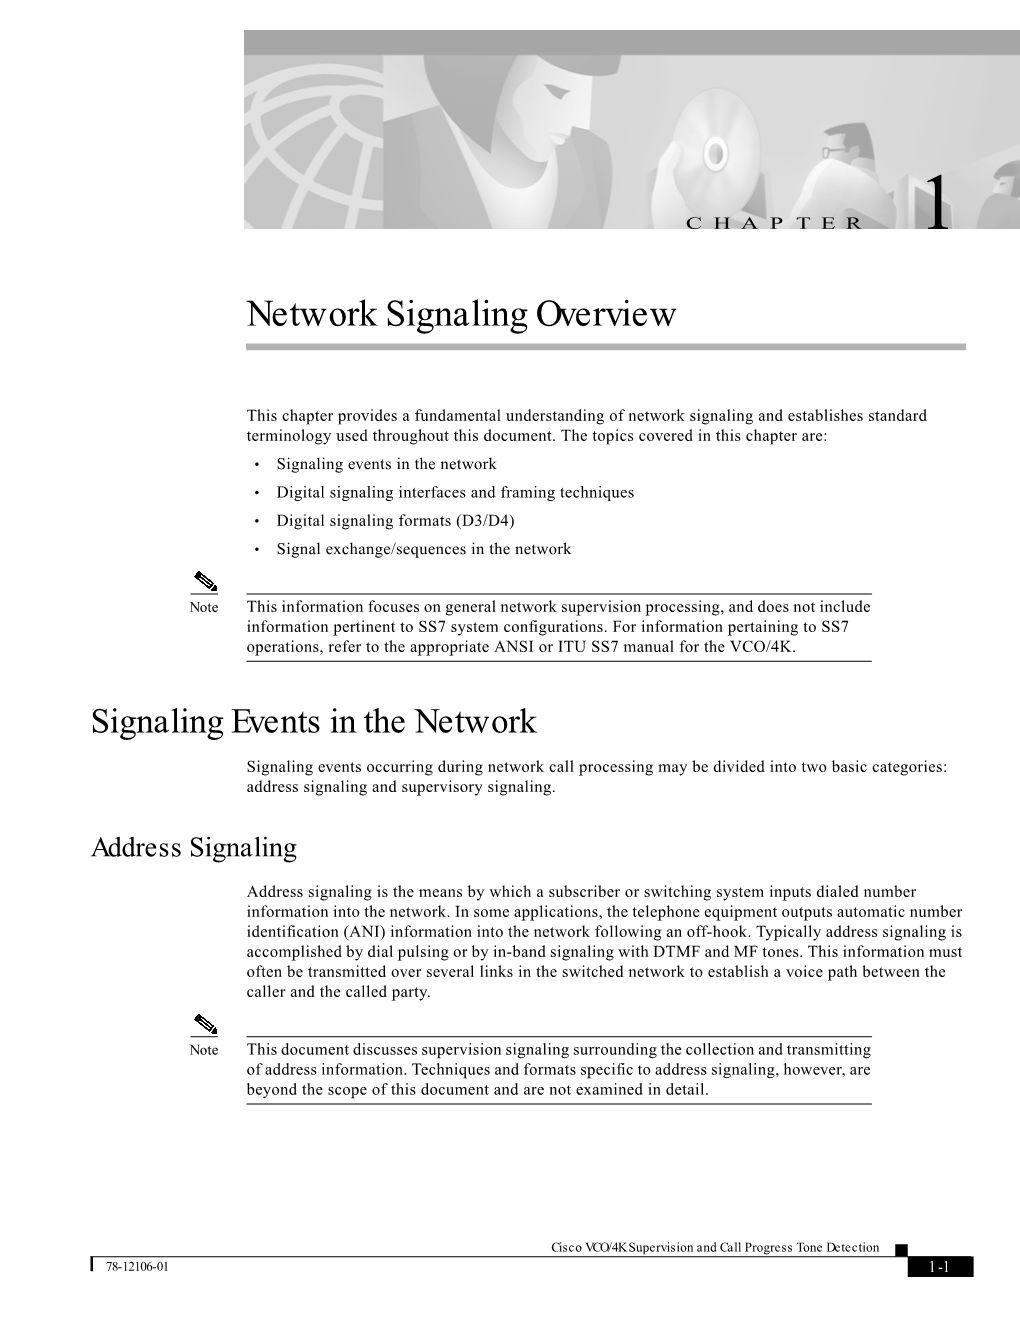 Network Signaling Overview